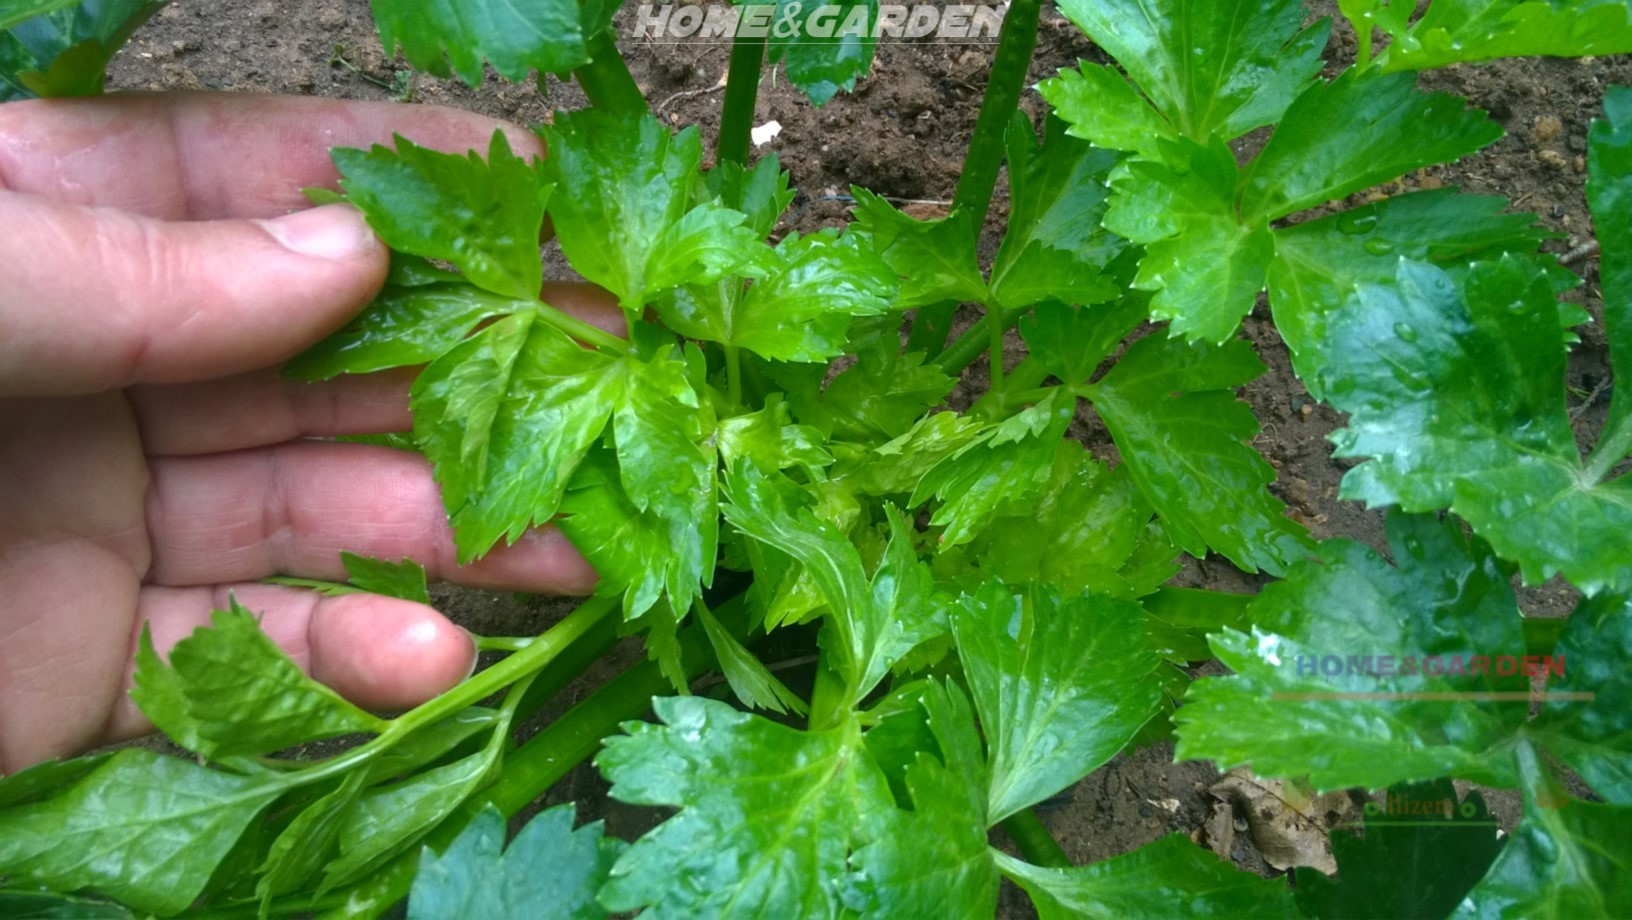 Watering your celery regularly and frequently is the key to producing a good crop. You have to keep the plants weed free, as weeds will compete for nutrients and moisture.